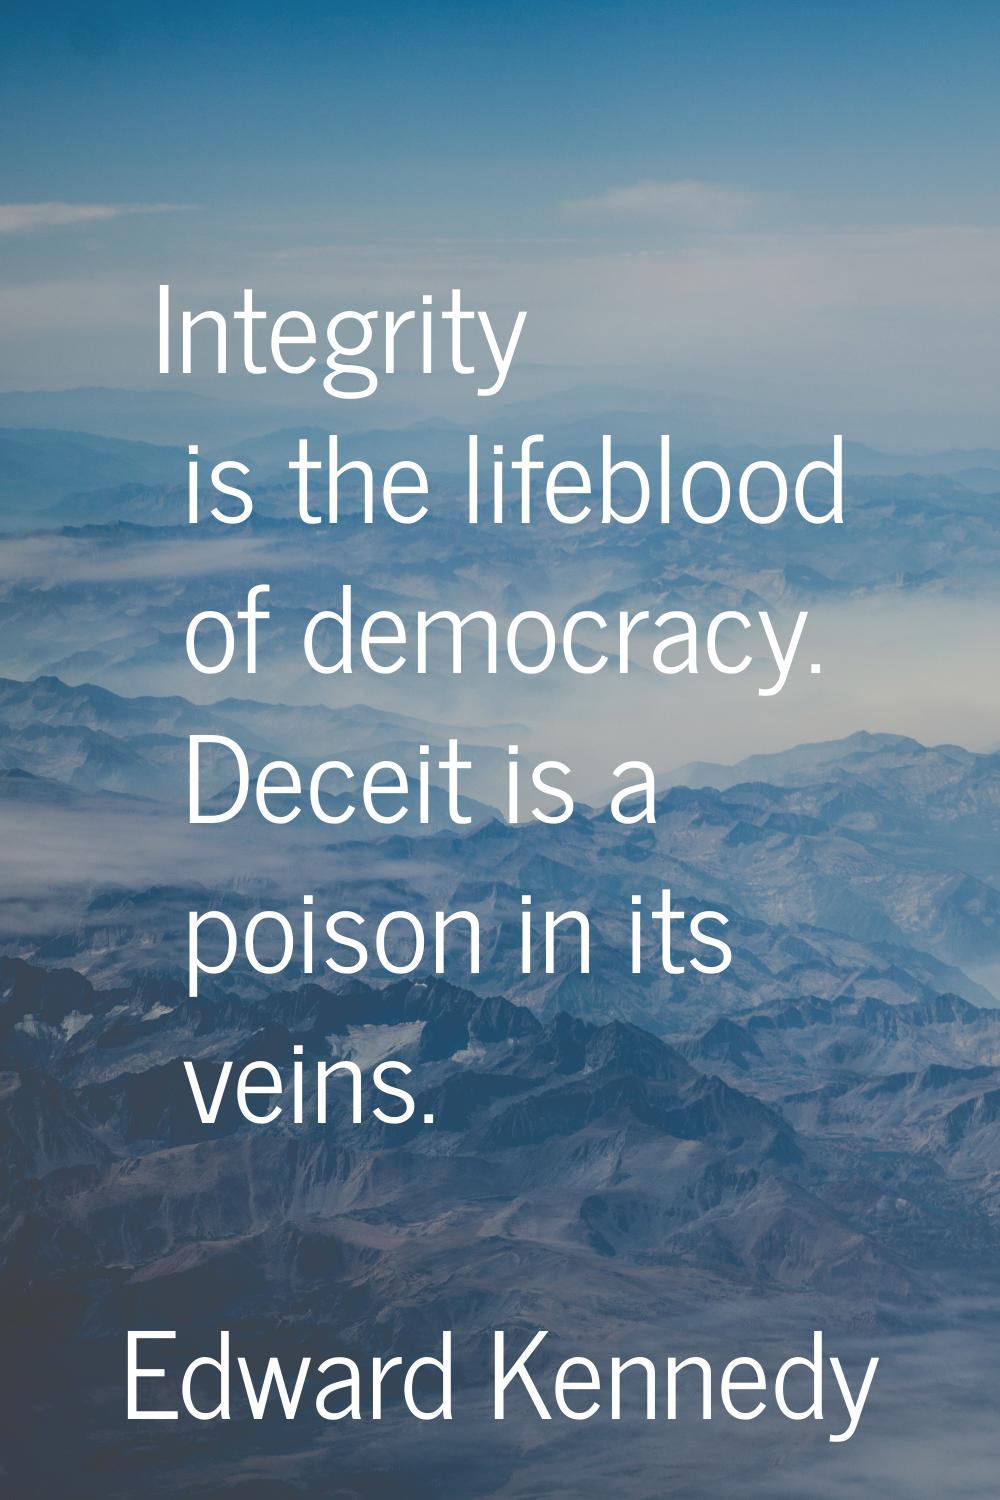 Integrity is the lifeblood of democracy. Deceit is a poison in its veins.